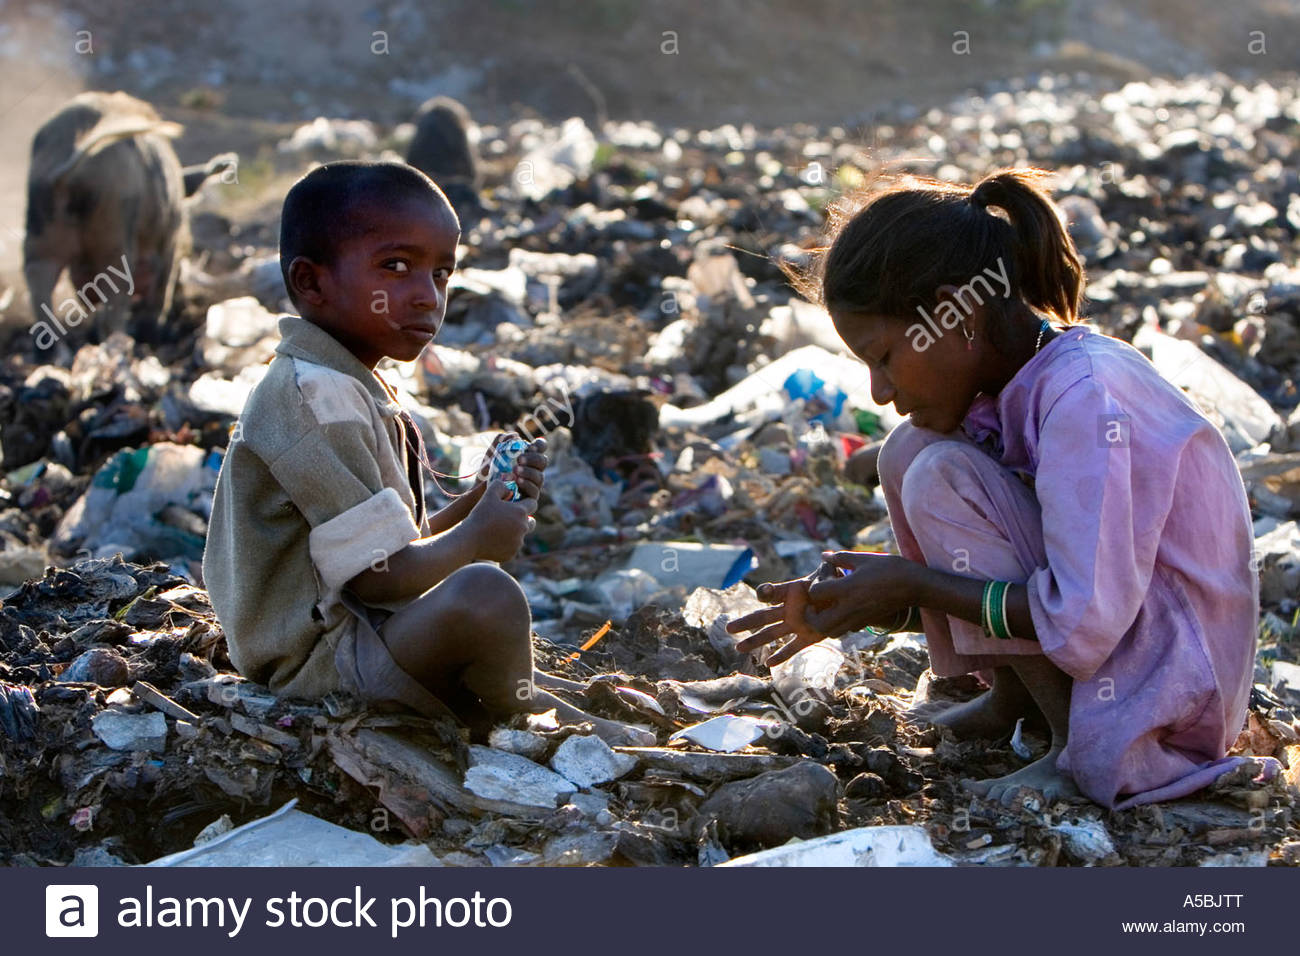 poor-indian-children-playing-with-toy-mobile-phone-whilst-sitting-A5BJTT.jpg